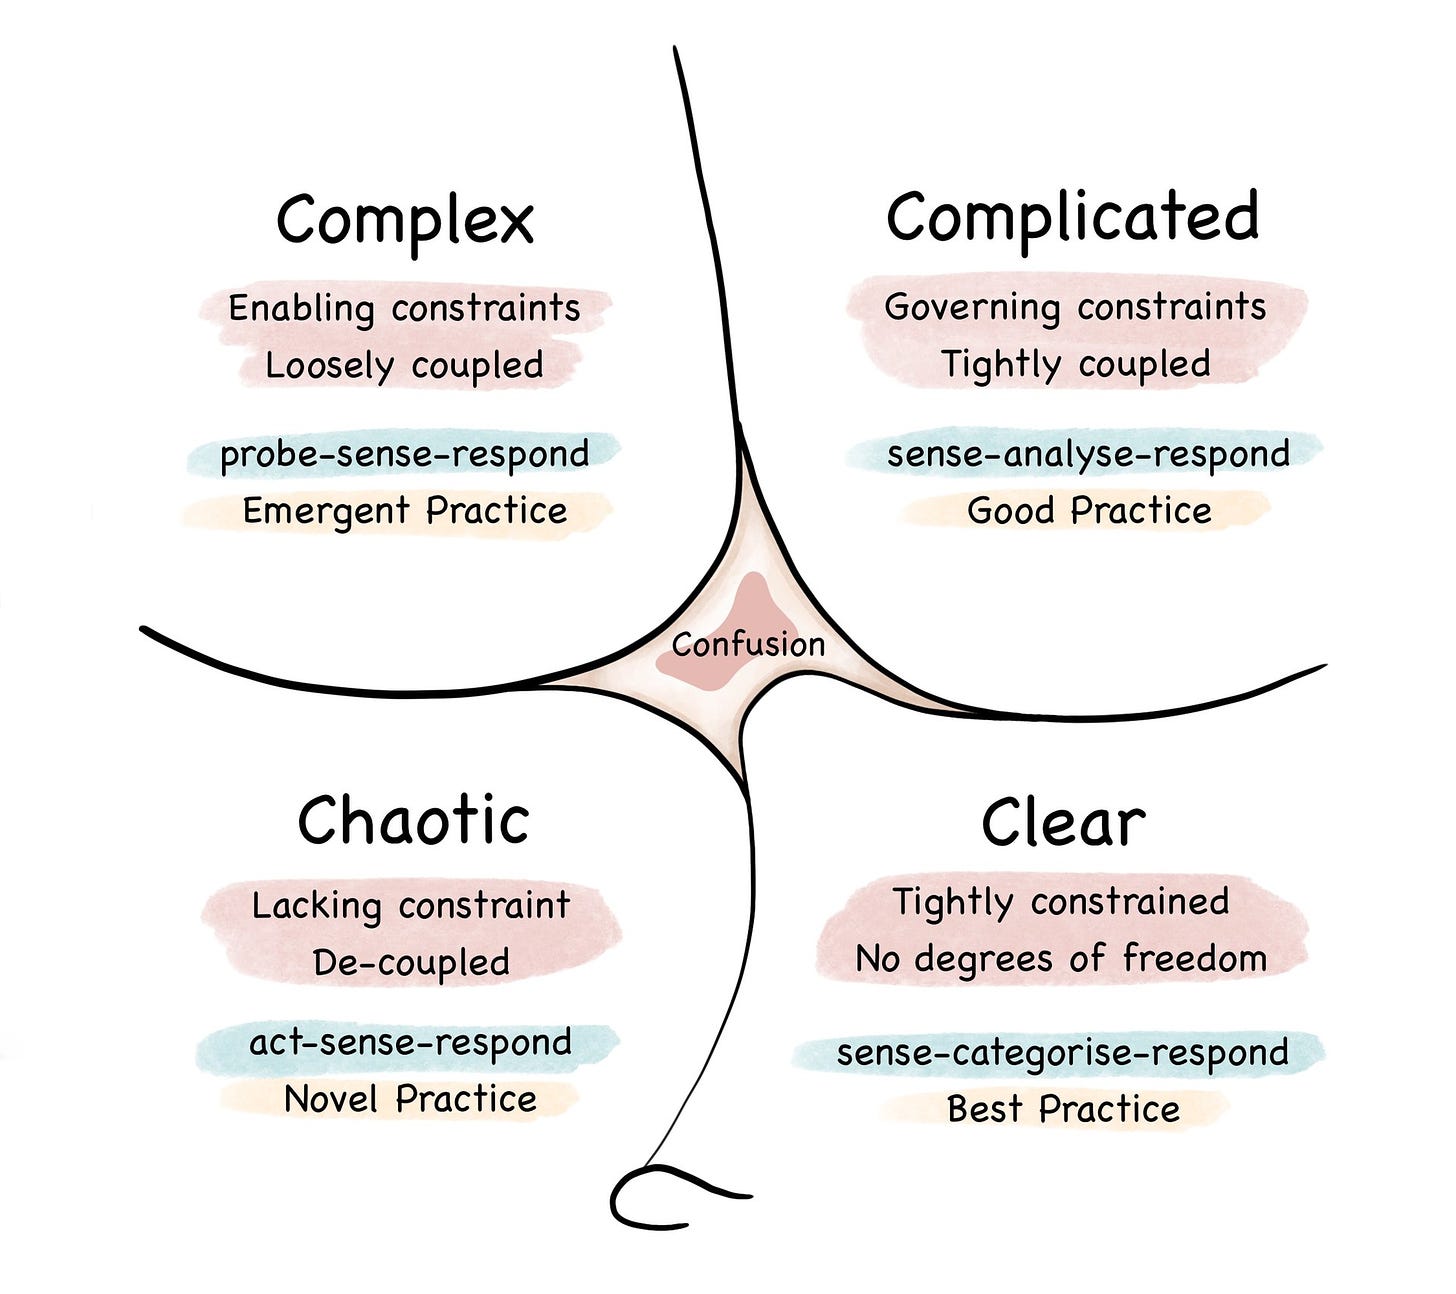 shows the four habitats of the Cynefin Framework - Clear, Complicated, Complex, and Chaotic - plus Confusion as the state of not knowing